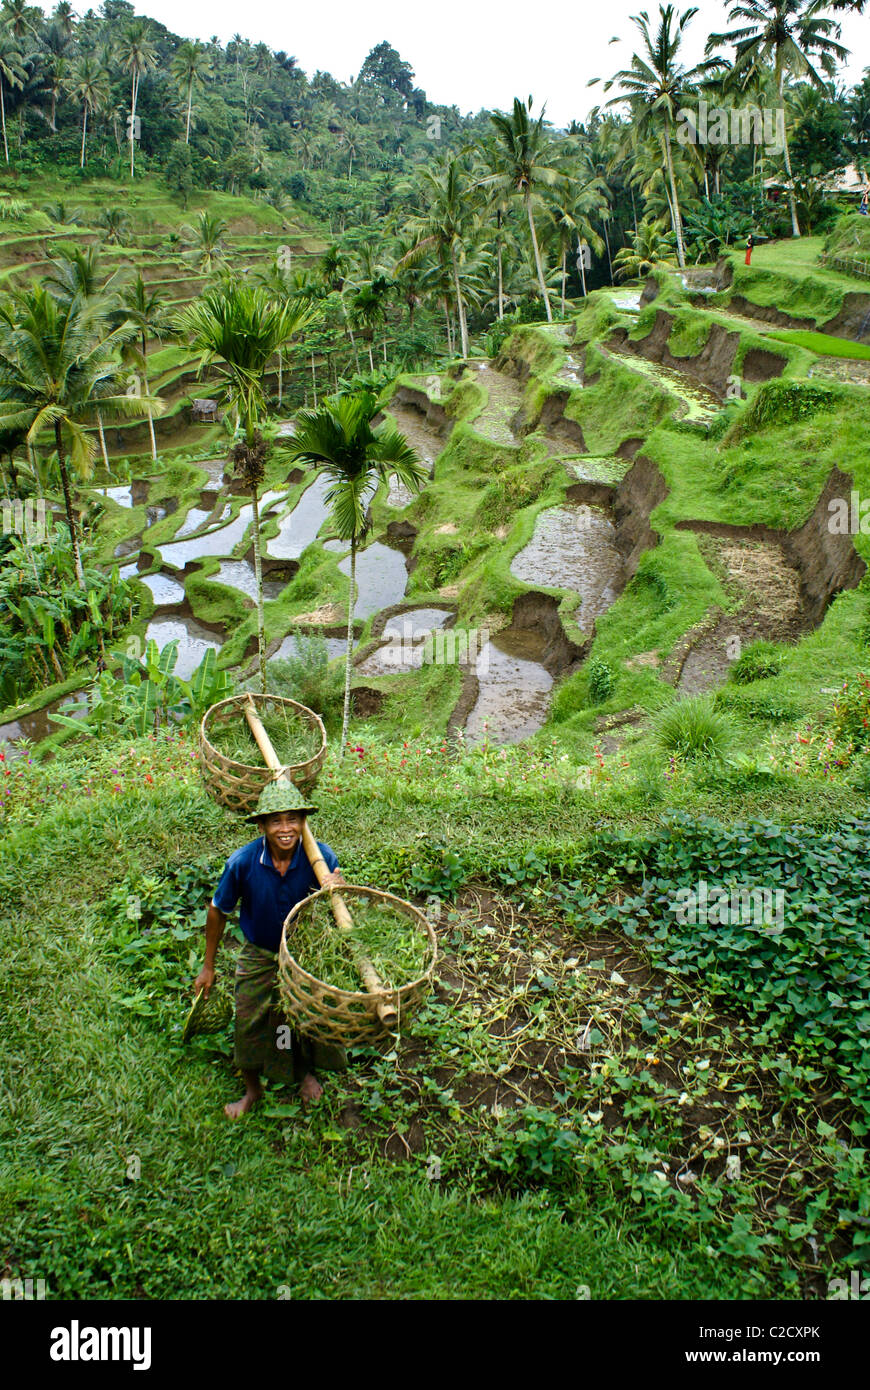 Farmer in rice terraces at Tegalalang, Bali, Indonesia Stock Photo